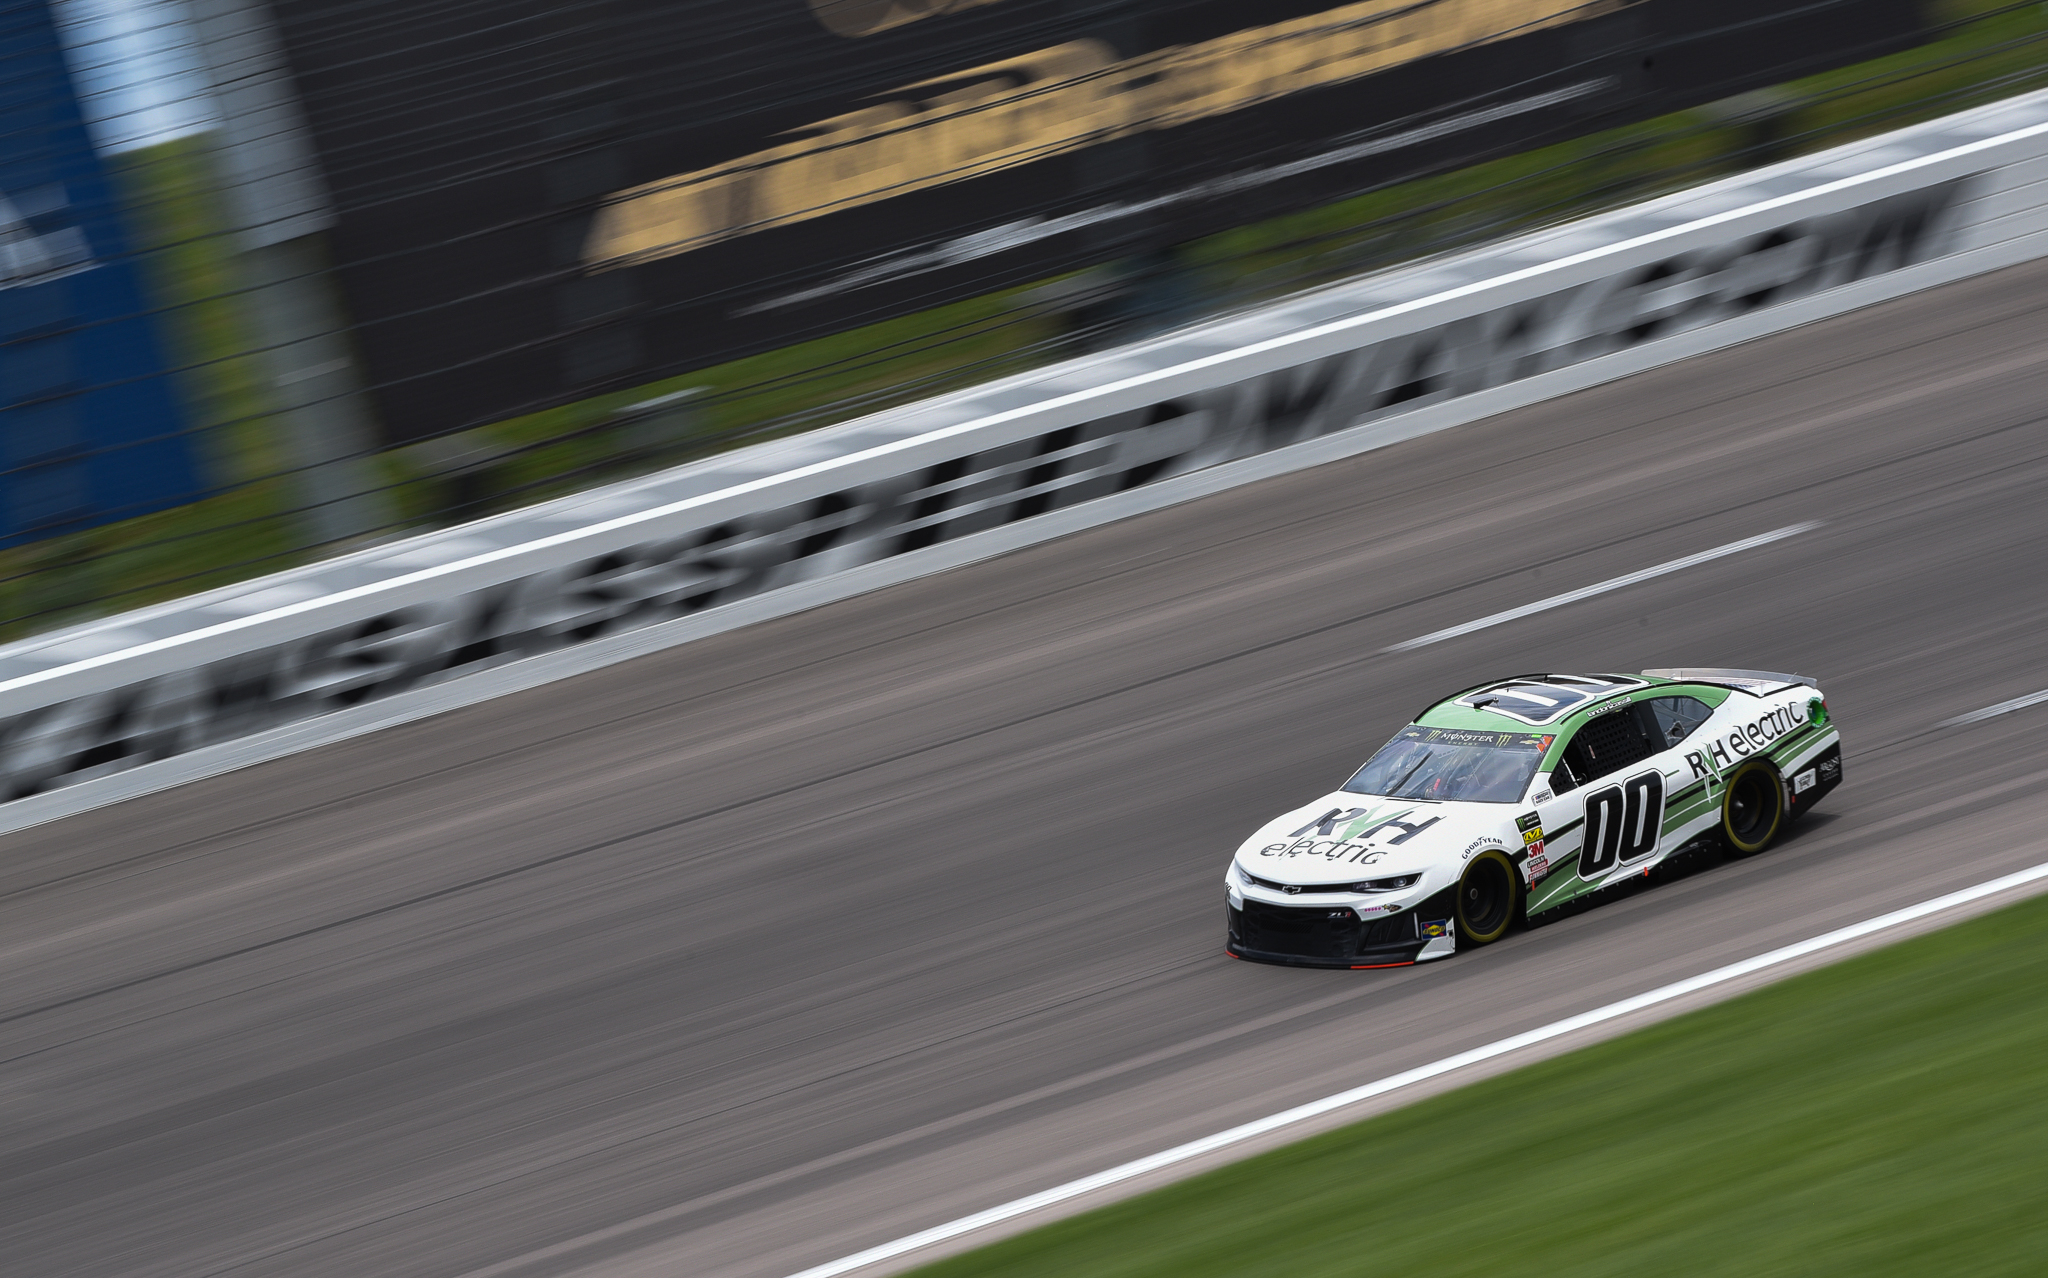 Whether or not Cassill's hurrying up for dinner at Kansas Speedway remains to be seen. (Photo Credit: Jeremy Thompson/TPF)